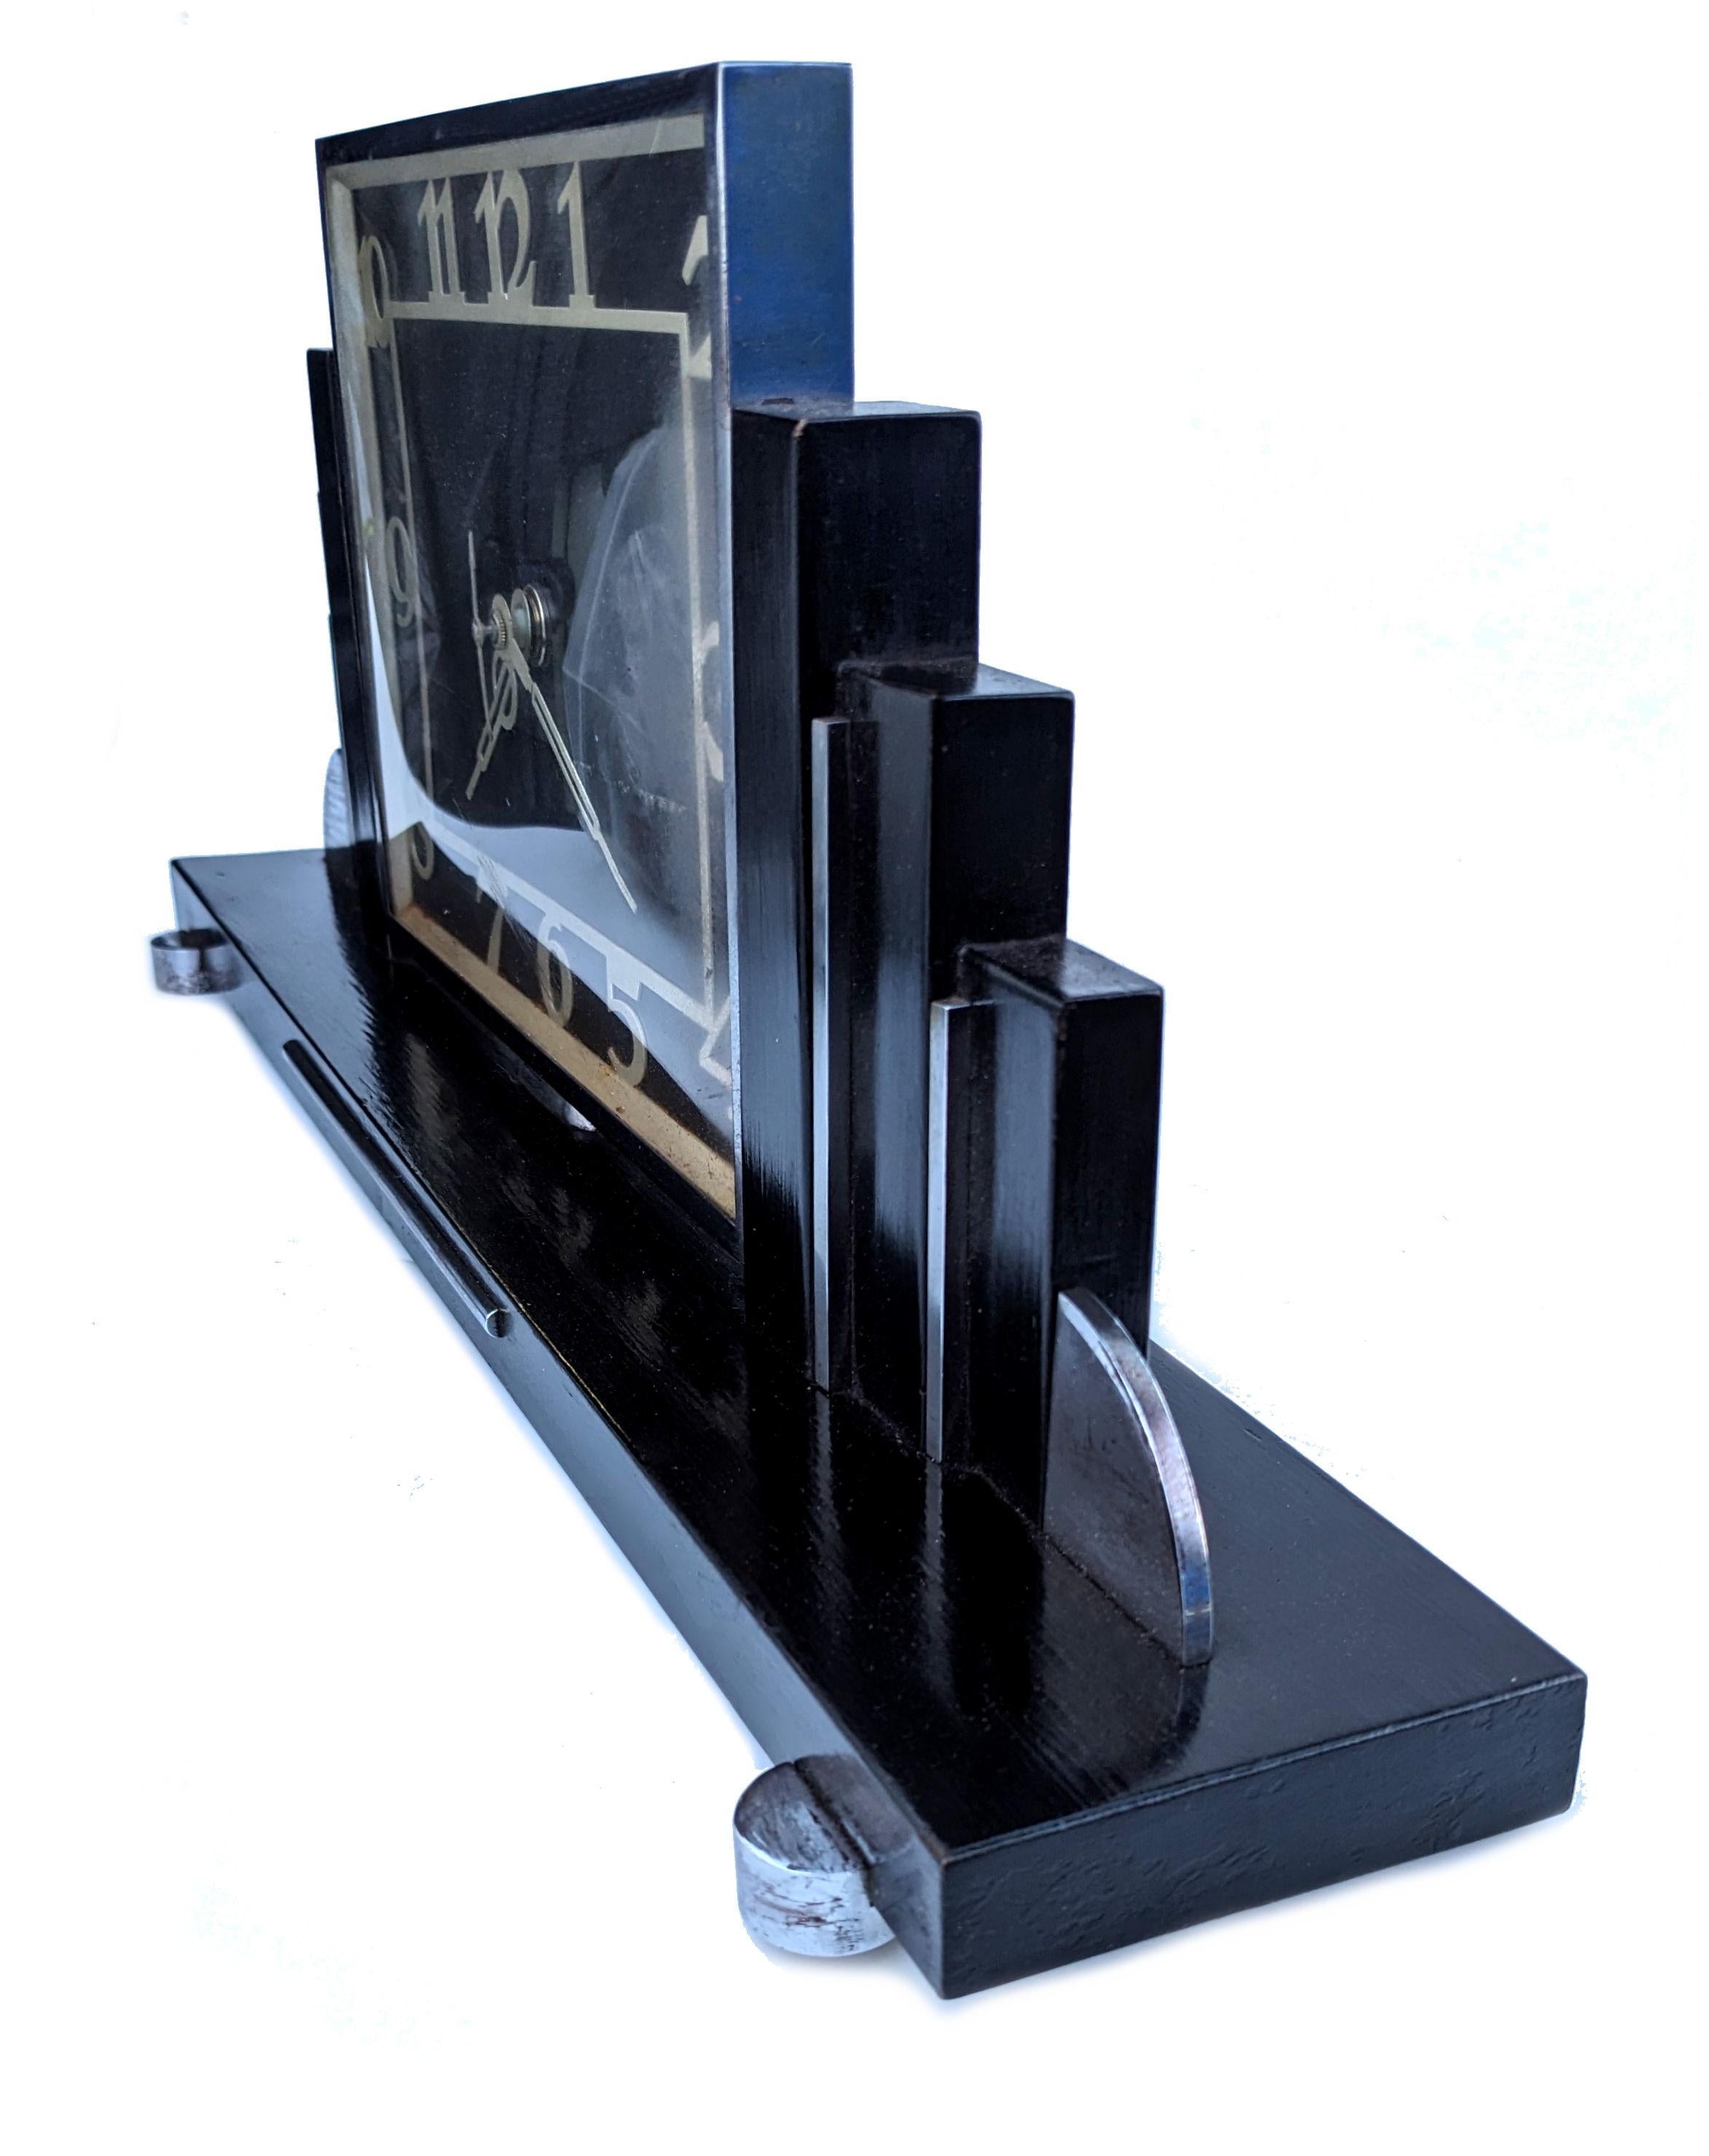 For your consideration is this very stylish 1930s Art Deco mantle clock made in England. Superb skyscraper stepped sides . Made from ebonized wood with chrome accents really sets this clock off perfectly. The movement which was originally electric